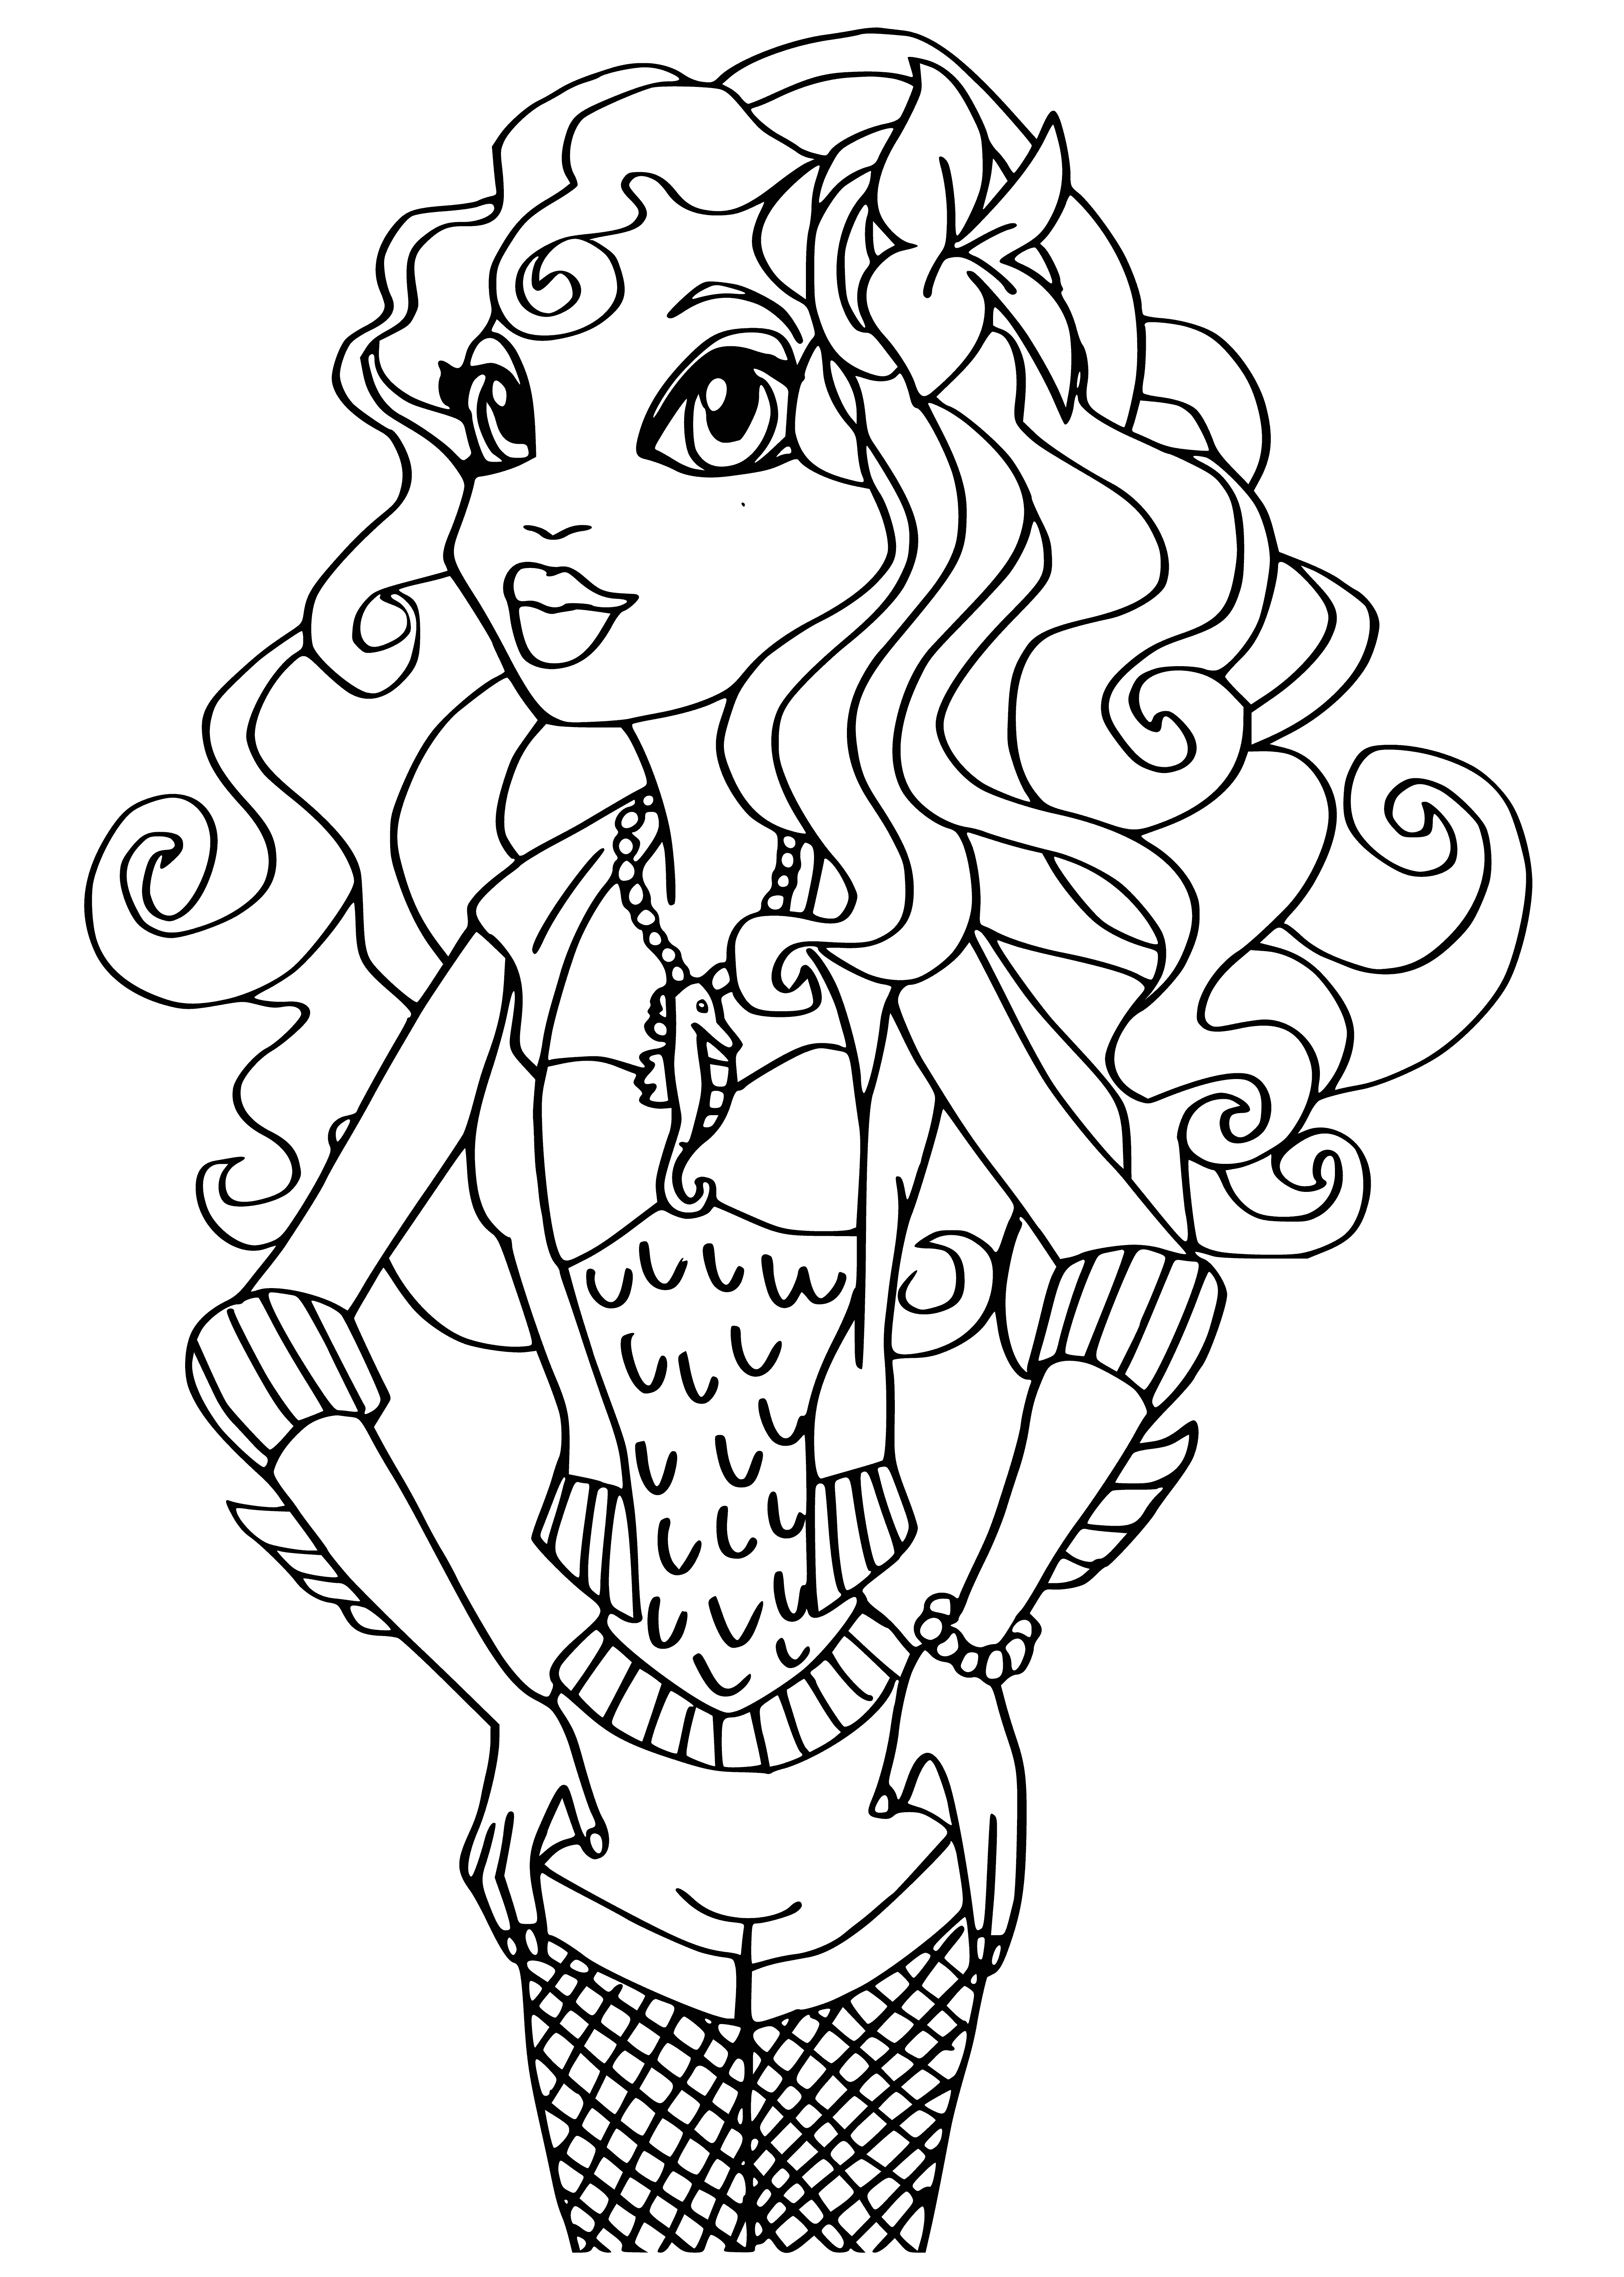 coloring page: Girl enjoys the big deep blue lagoon, ready to dive in with outstretched arms, head tilted back.